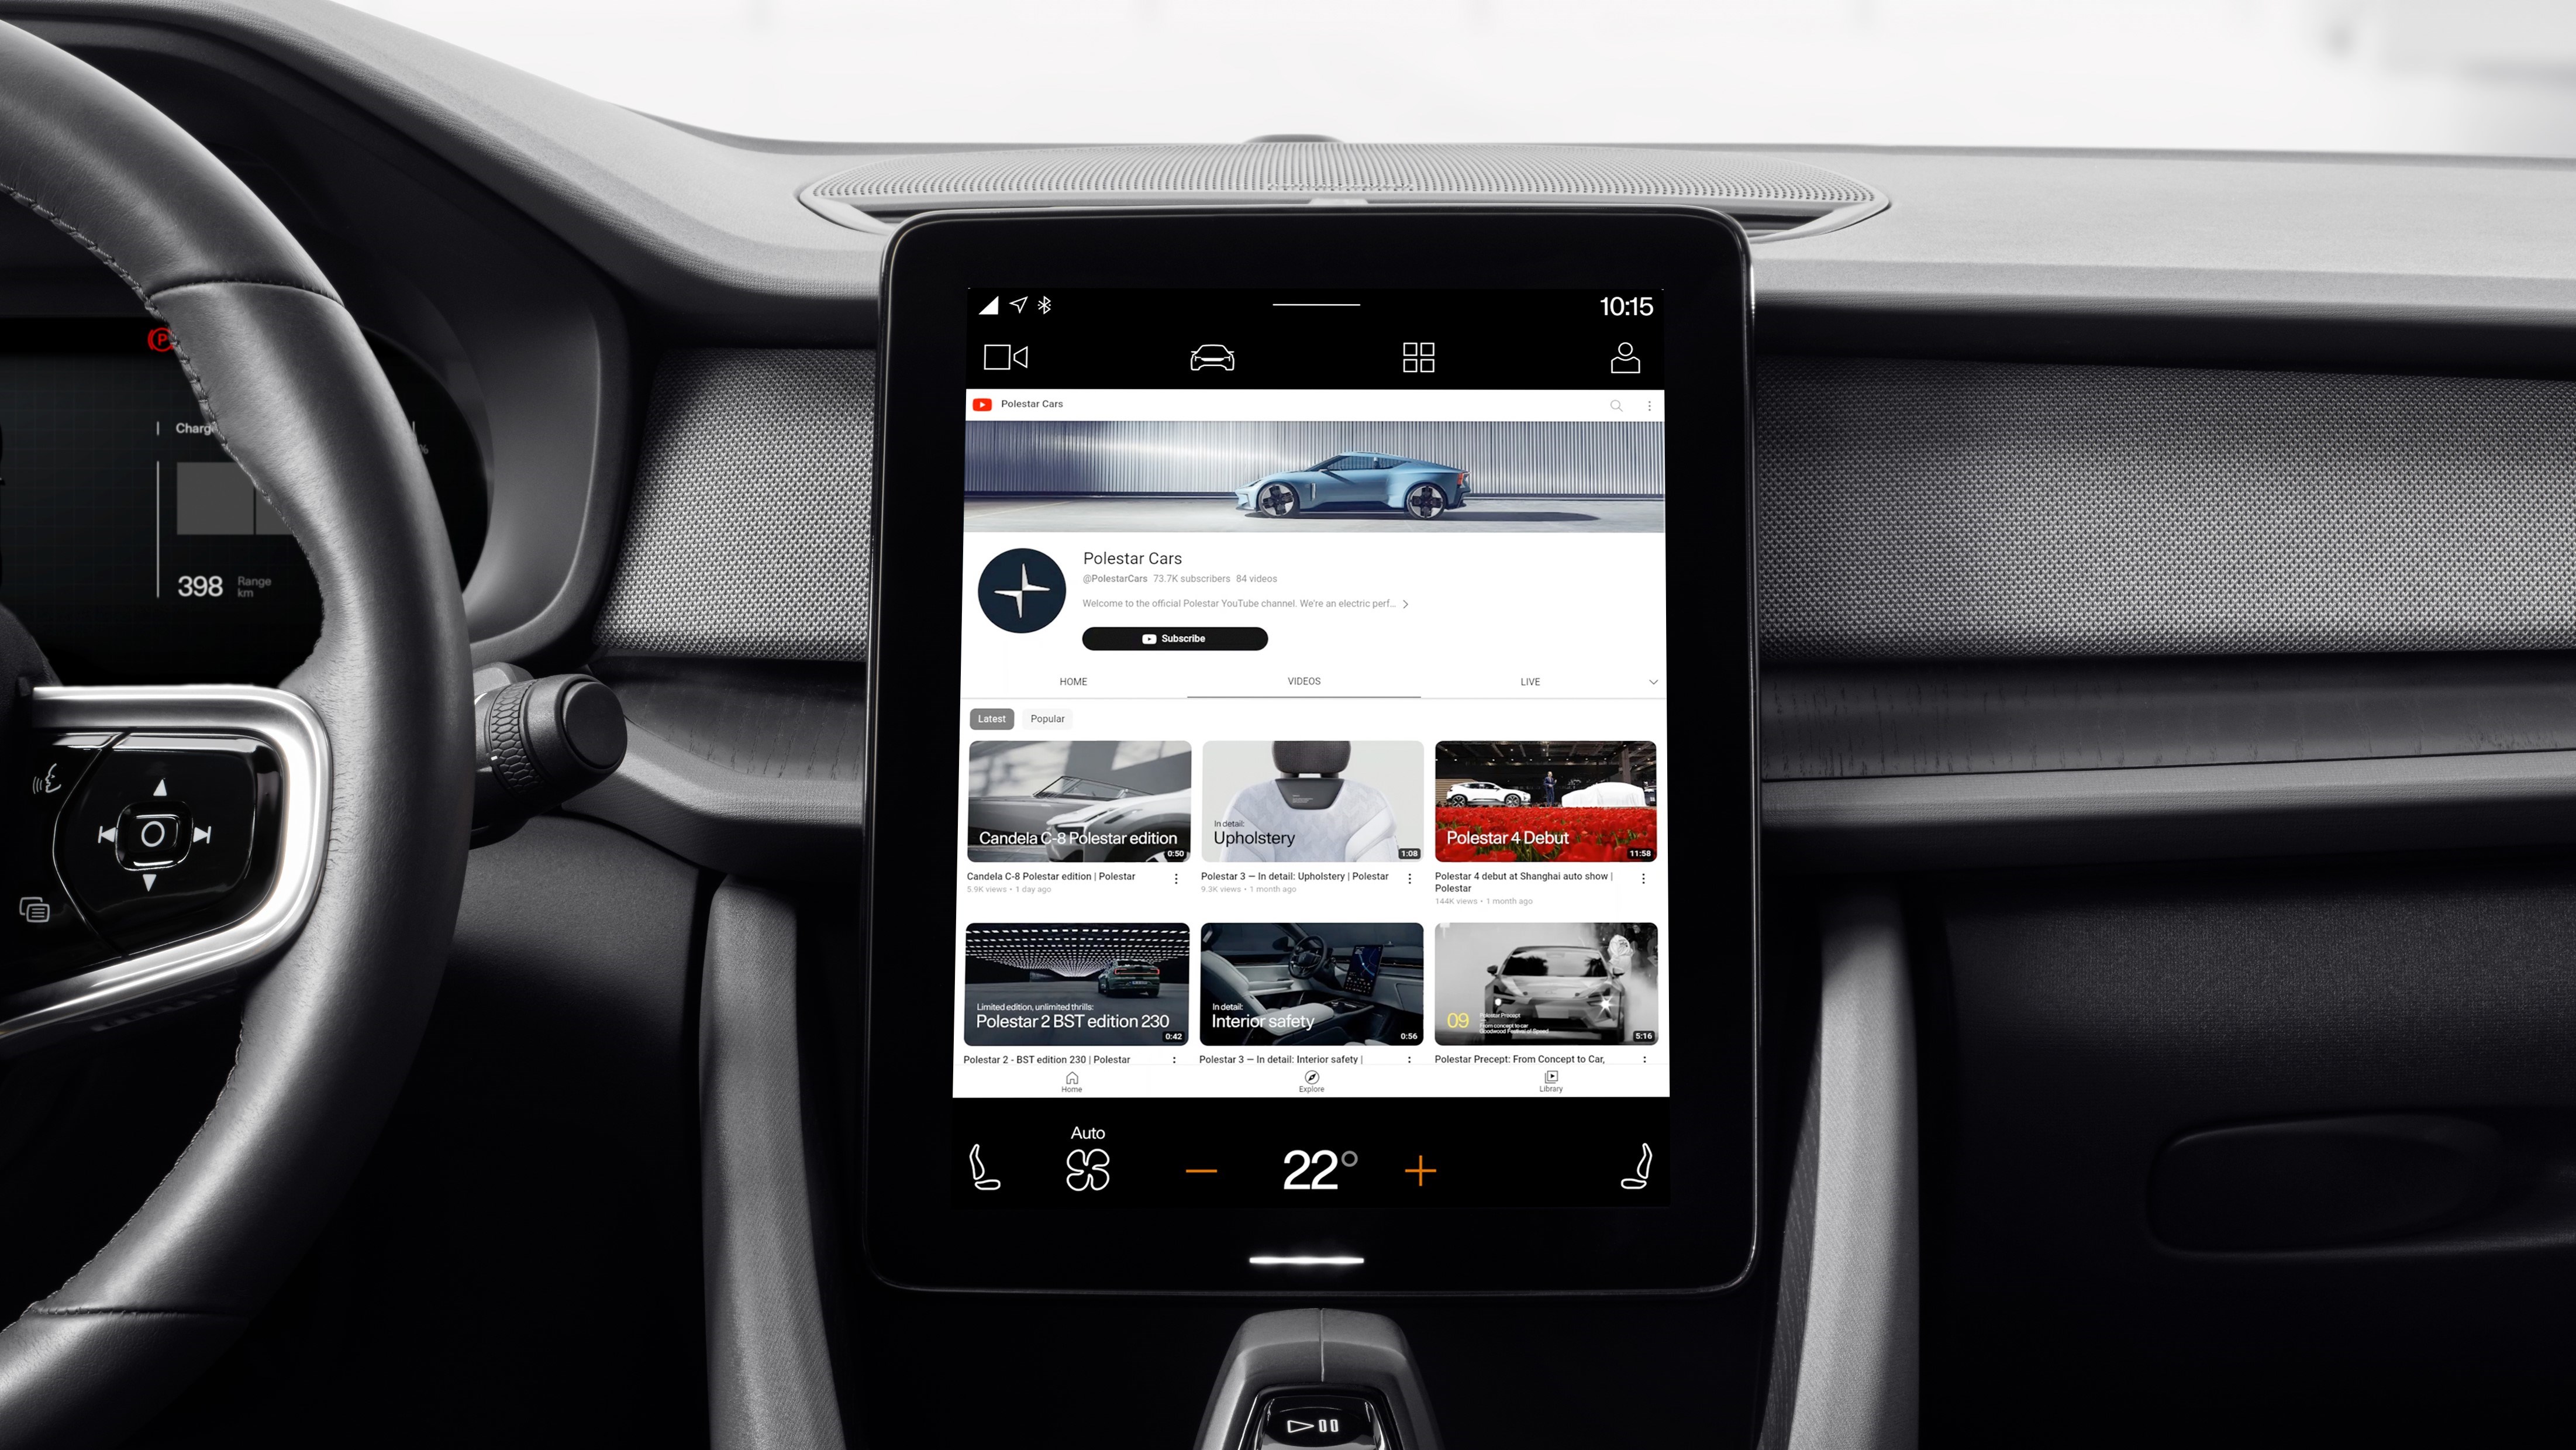 Polestar 2 update adds YouTube integration and new CarPlay features